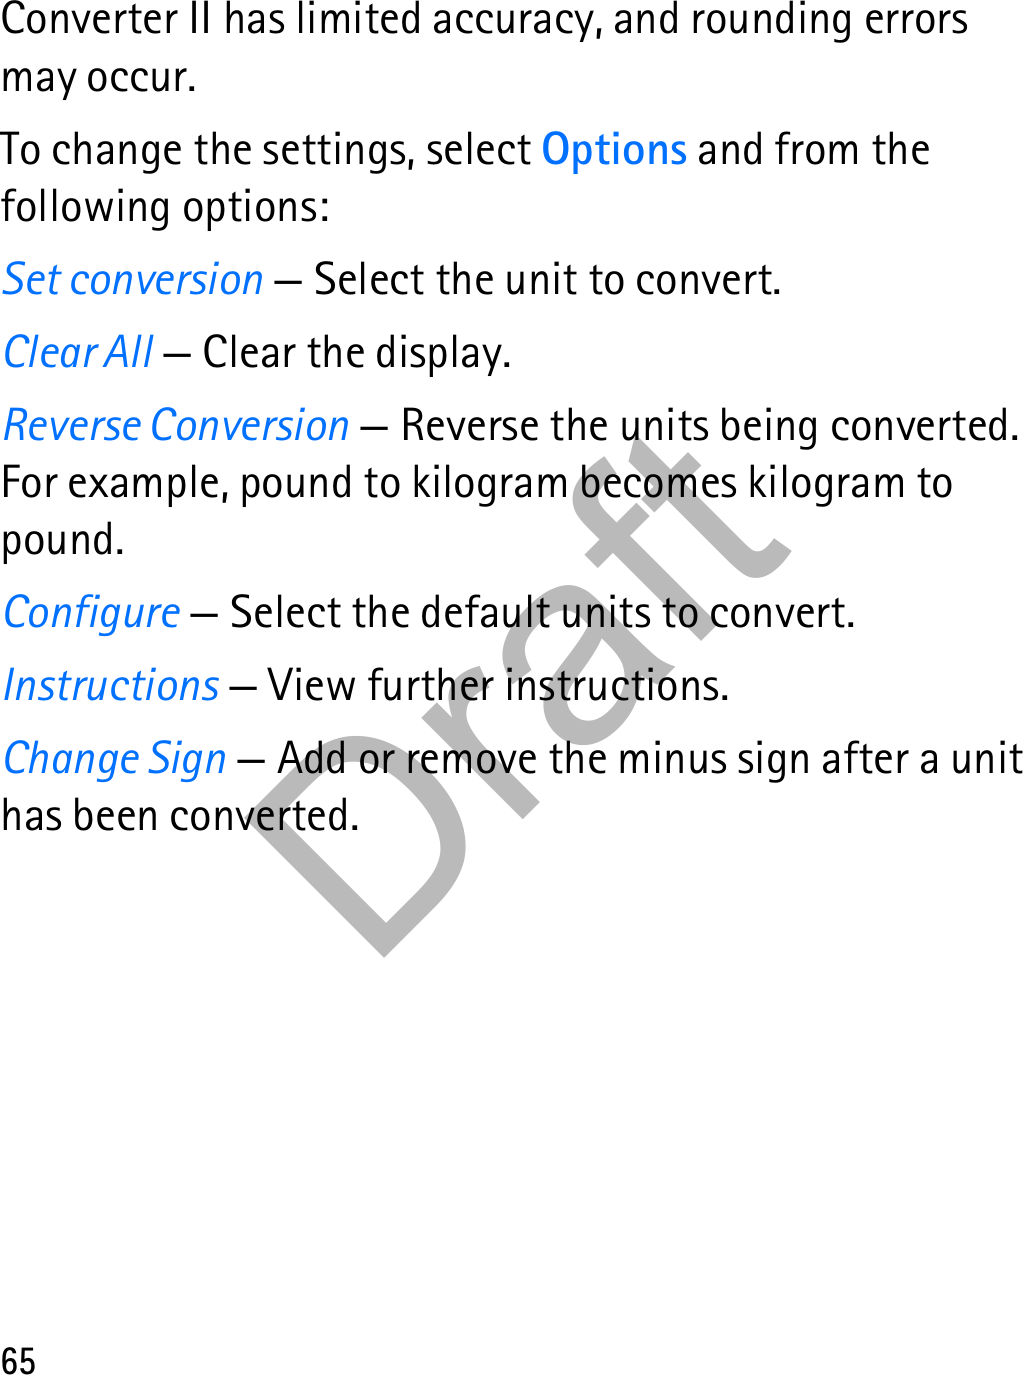 65Converter II has limited accuracy, and rounding errors may occur.To change the settings, select Options and from the following options:Set conversion — Select the unit to convert.Clear All — Clear the display.Reverse Conversion — Reverse the units being converted. For example, pound to kilogram becomes kilogram to pound.Configure — Select the default units to convert.Instructions — View further instructions.Change Sign — Add or remove the minus sign after a unit has been converted.Draft